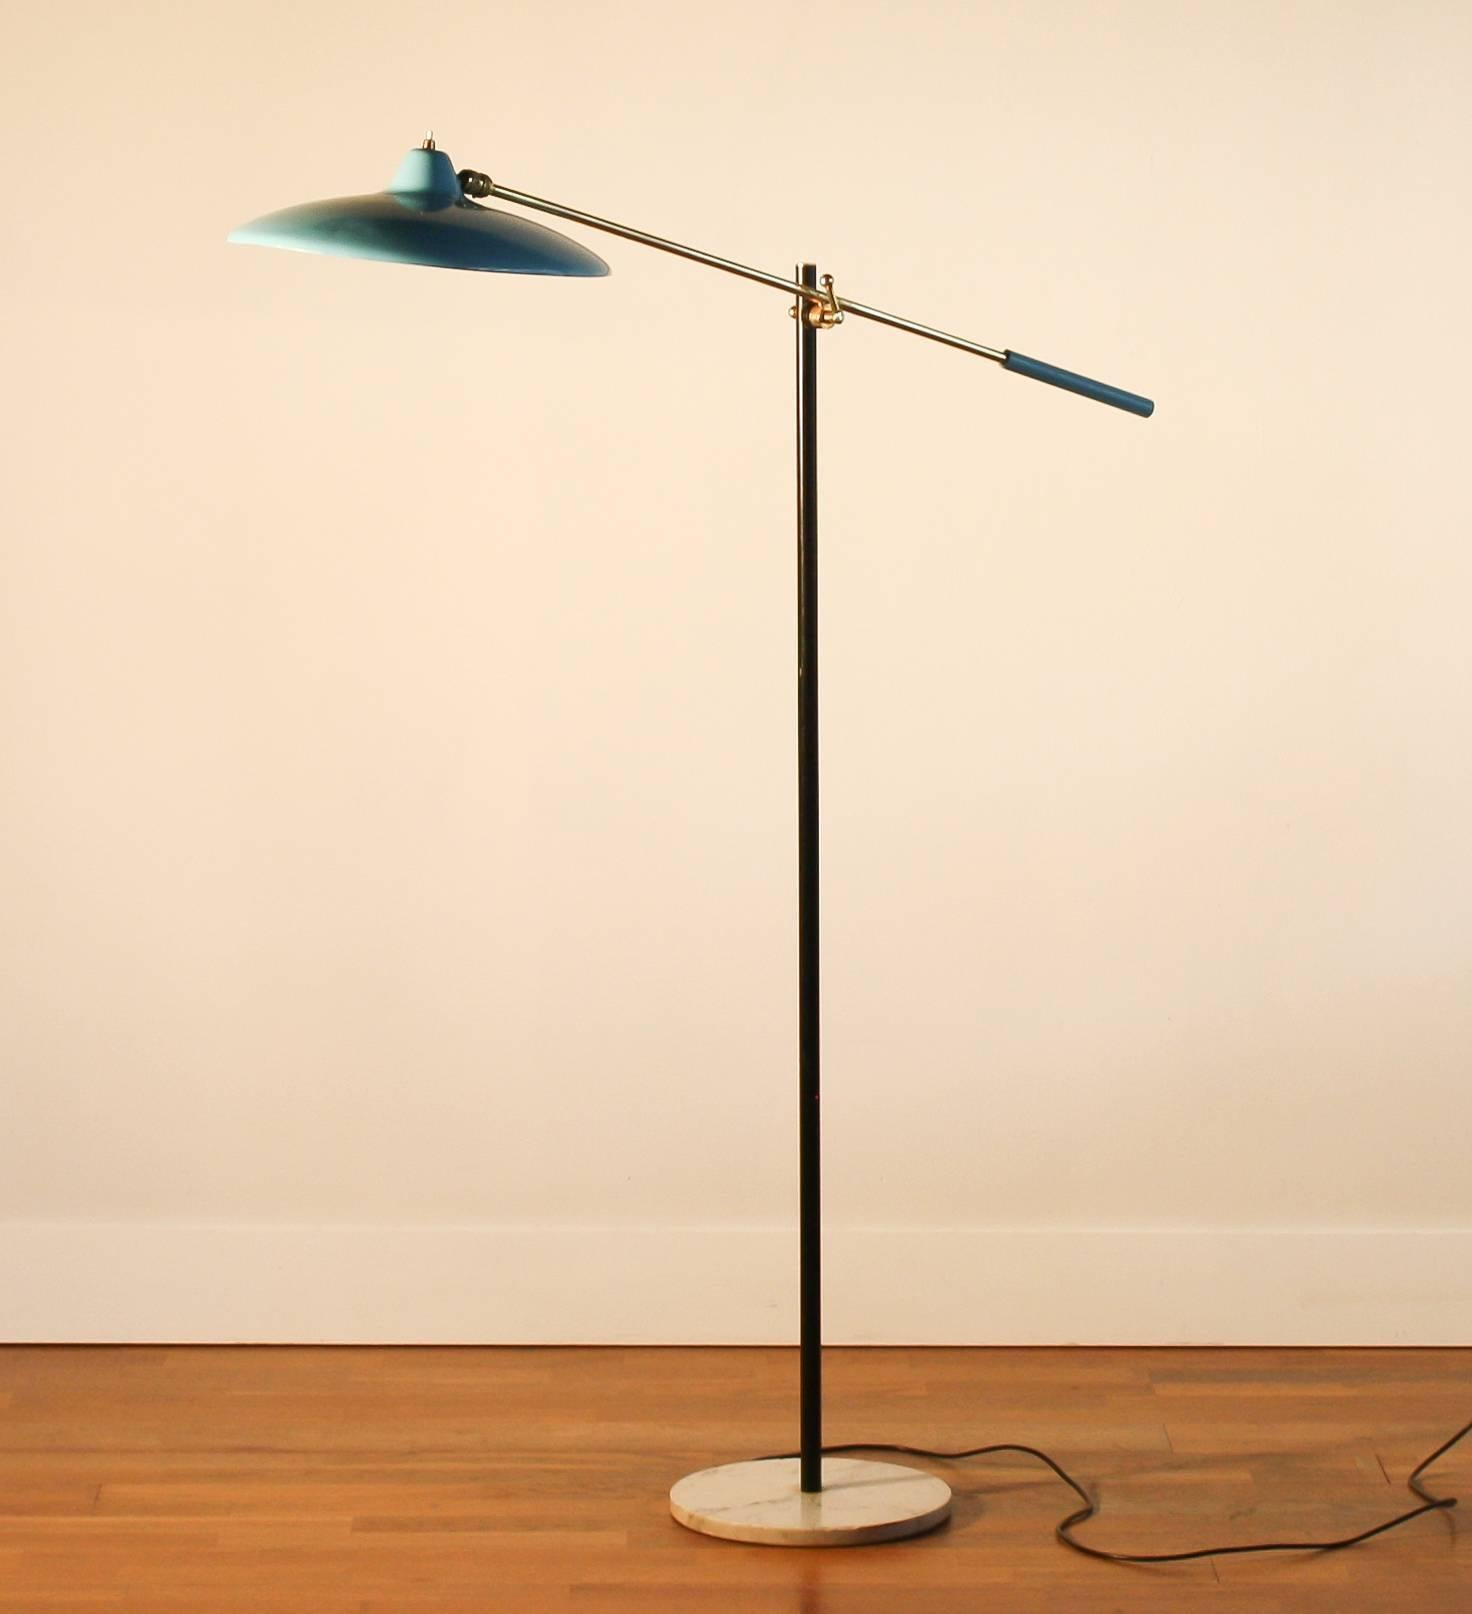 A beautiful floor lamp by Stilnovo, Italy.
The lampshade has a beautiful light blue color.
It also has brass details and a white Carrara marble base.
The stand is black lacquered.
It is in a very nice condition.
Period, 1950s
Dimensions: H 132